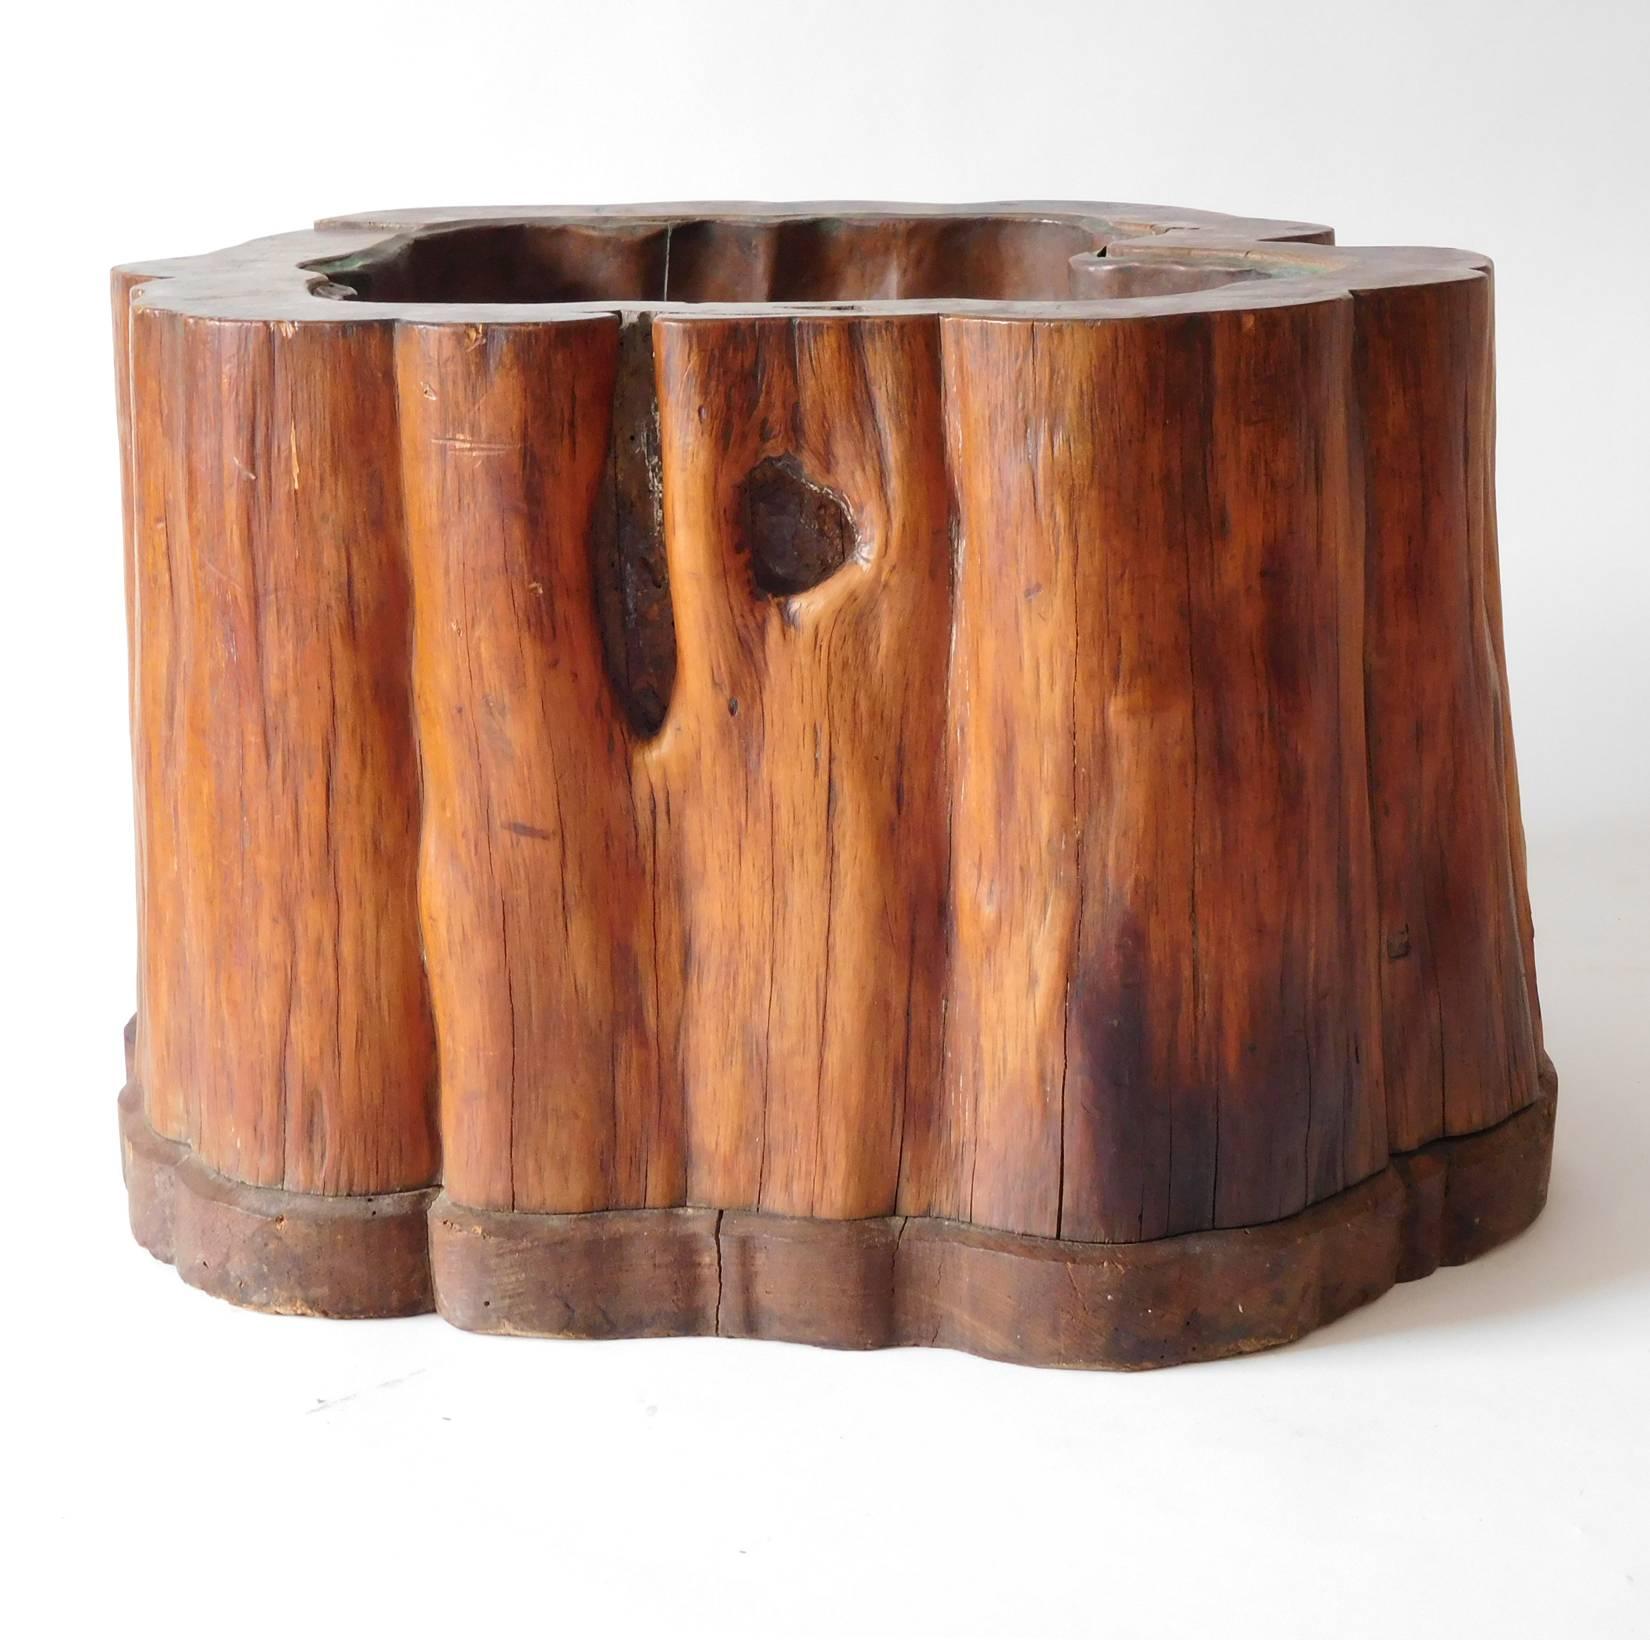 Two antique burl wood hibachi with copper liners. Each piece has is attached to its wood stand which was crafted to follow the contour lines of the burl. The copper liners are fitted to the contours of wood as well. Unique and highly desirable. Sold